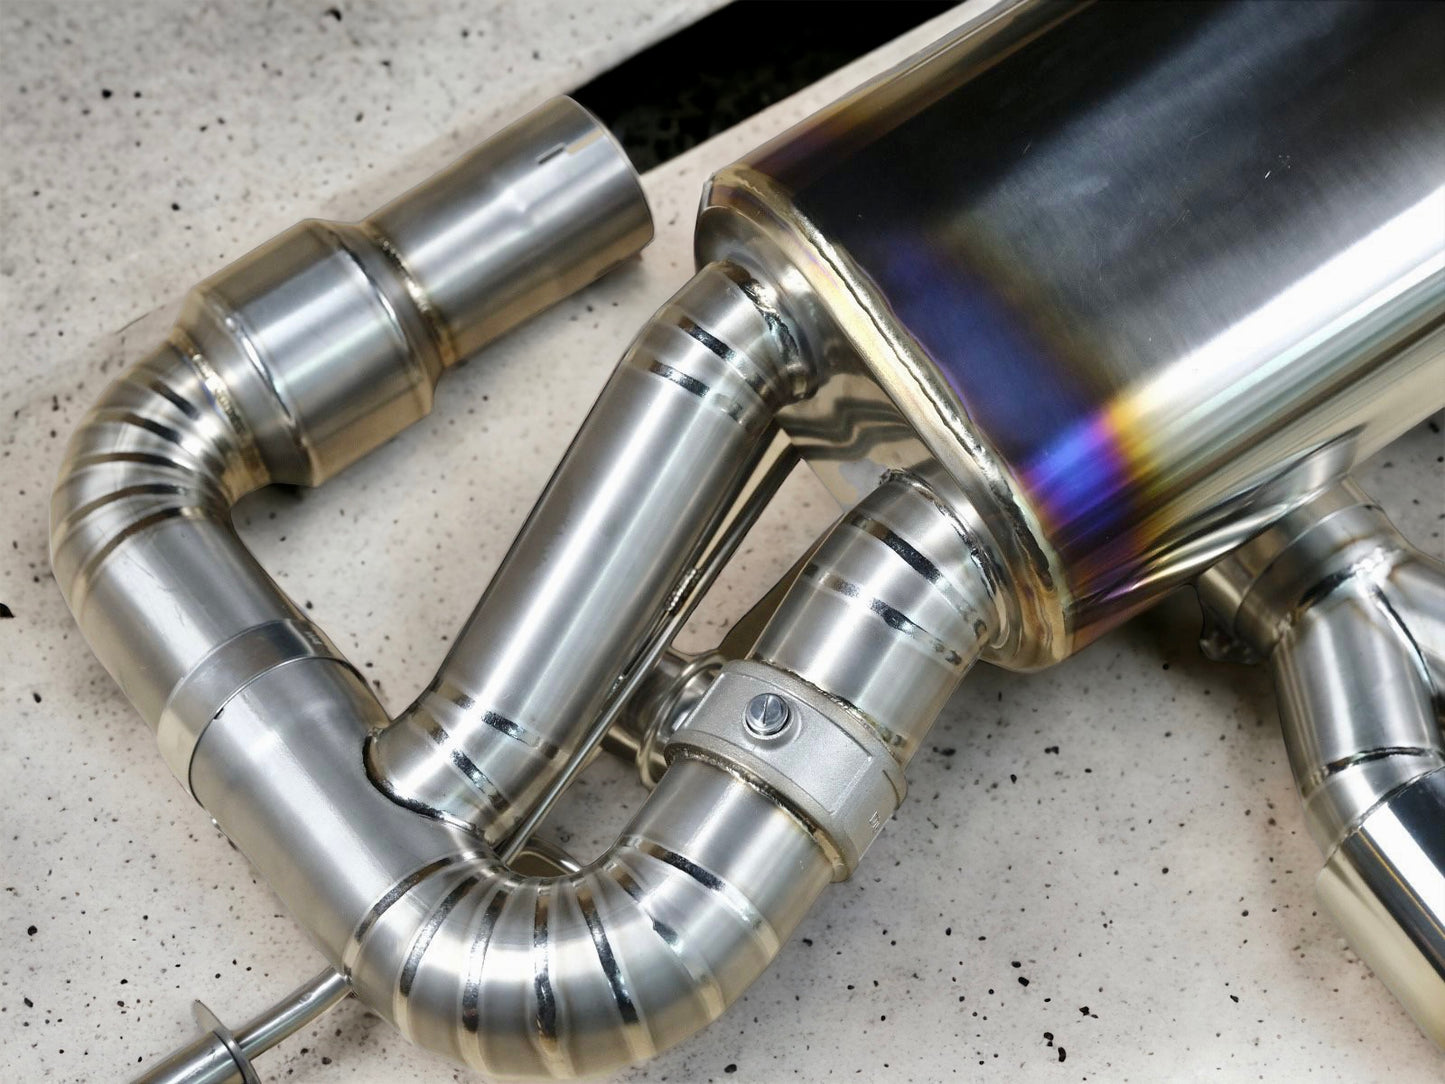 Lotus Exige 410 Sport Titanium exhaust systems by Aerie performance